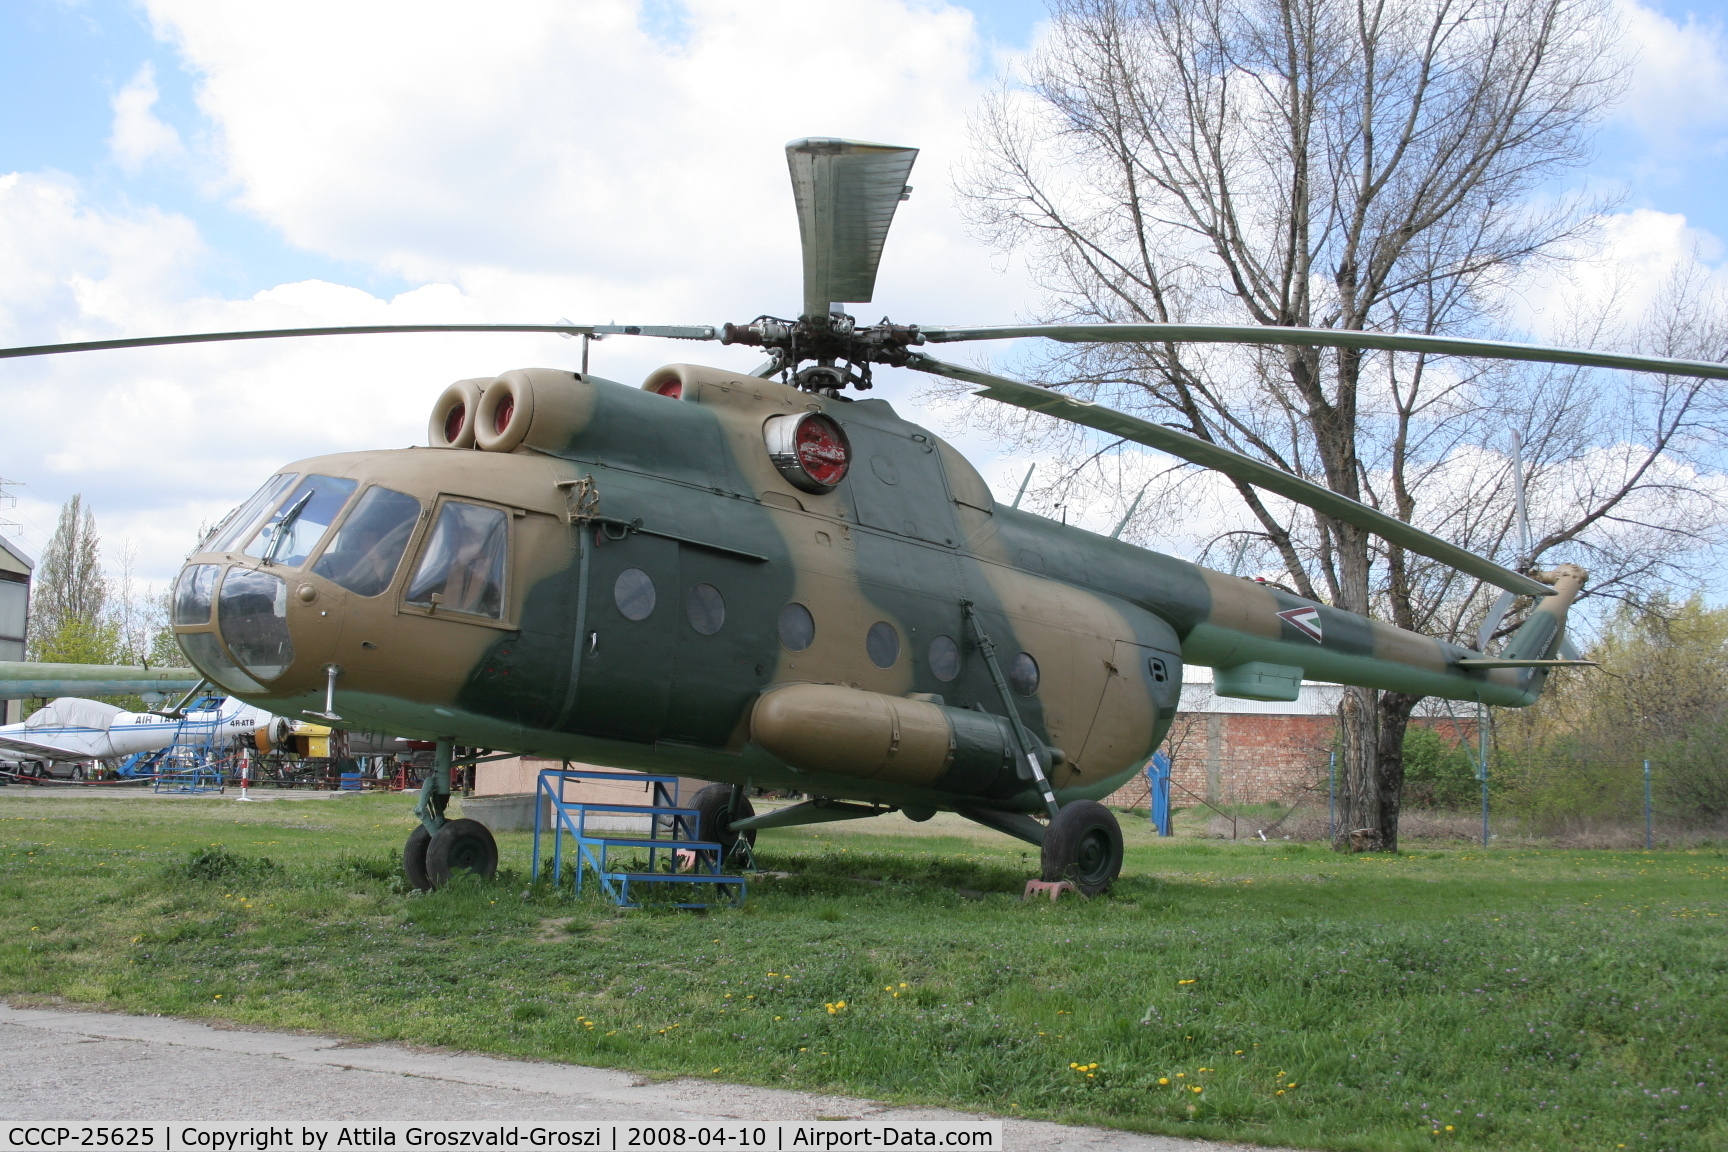 CCCP-25625, Mil Mi-8T Hip C/N 9775212, Csepel, Lajos Kossuth Grammar school apprentice workshop's yard - Hungary - Displayed in Hungary - Air Force colours but this Mi-8 never flew for the Air Force. It is an ex Aeroflot Mi-8 and it was repainted here in the technical school